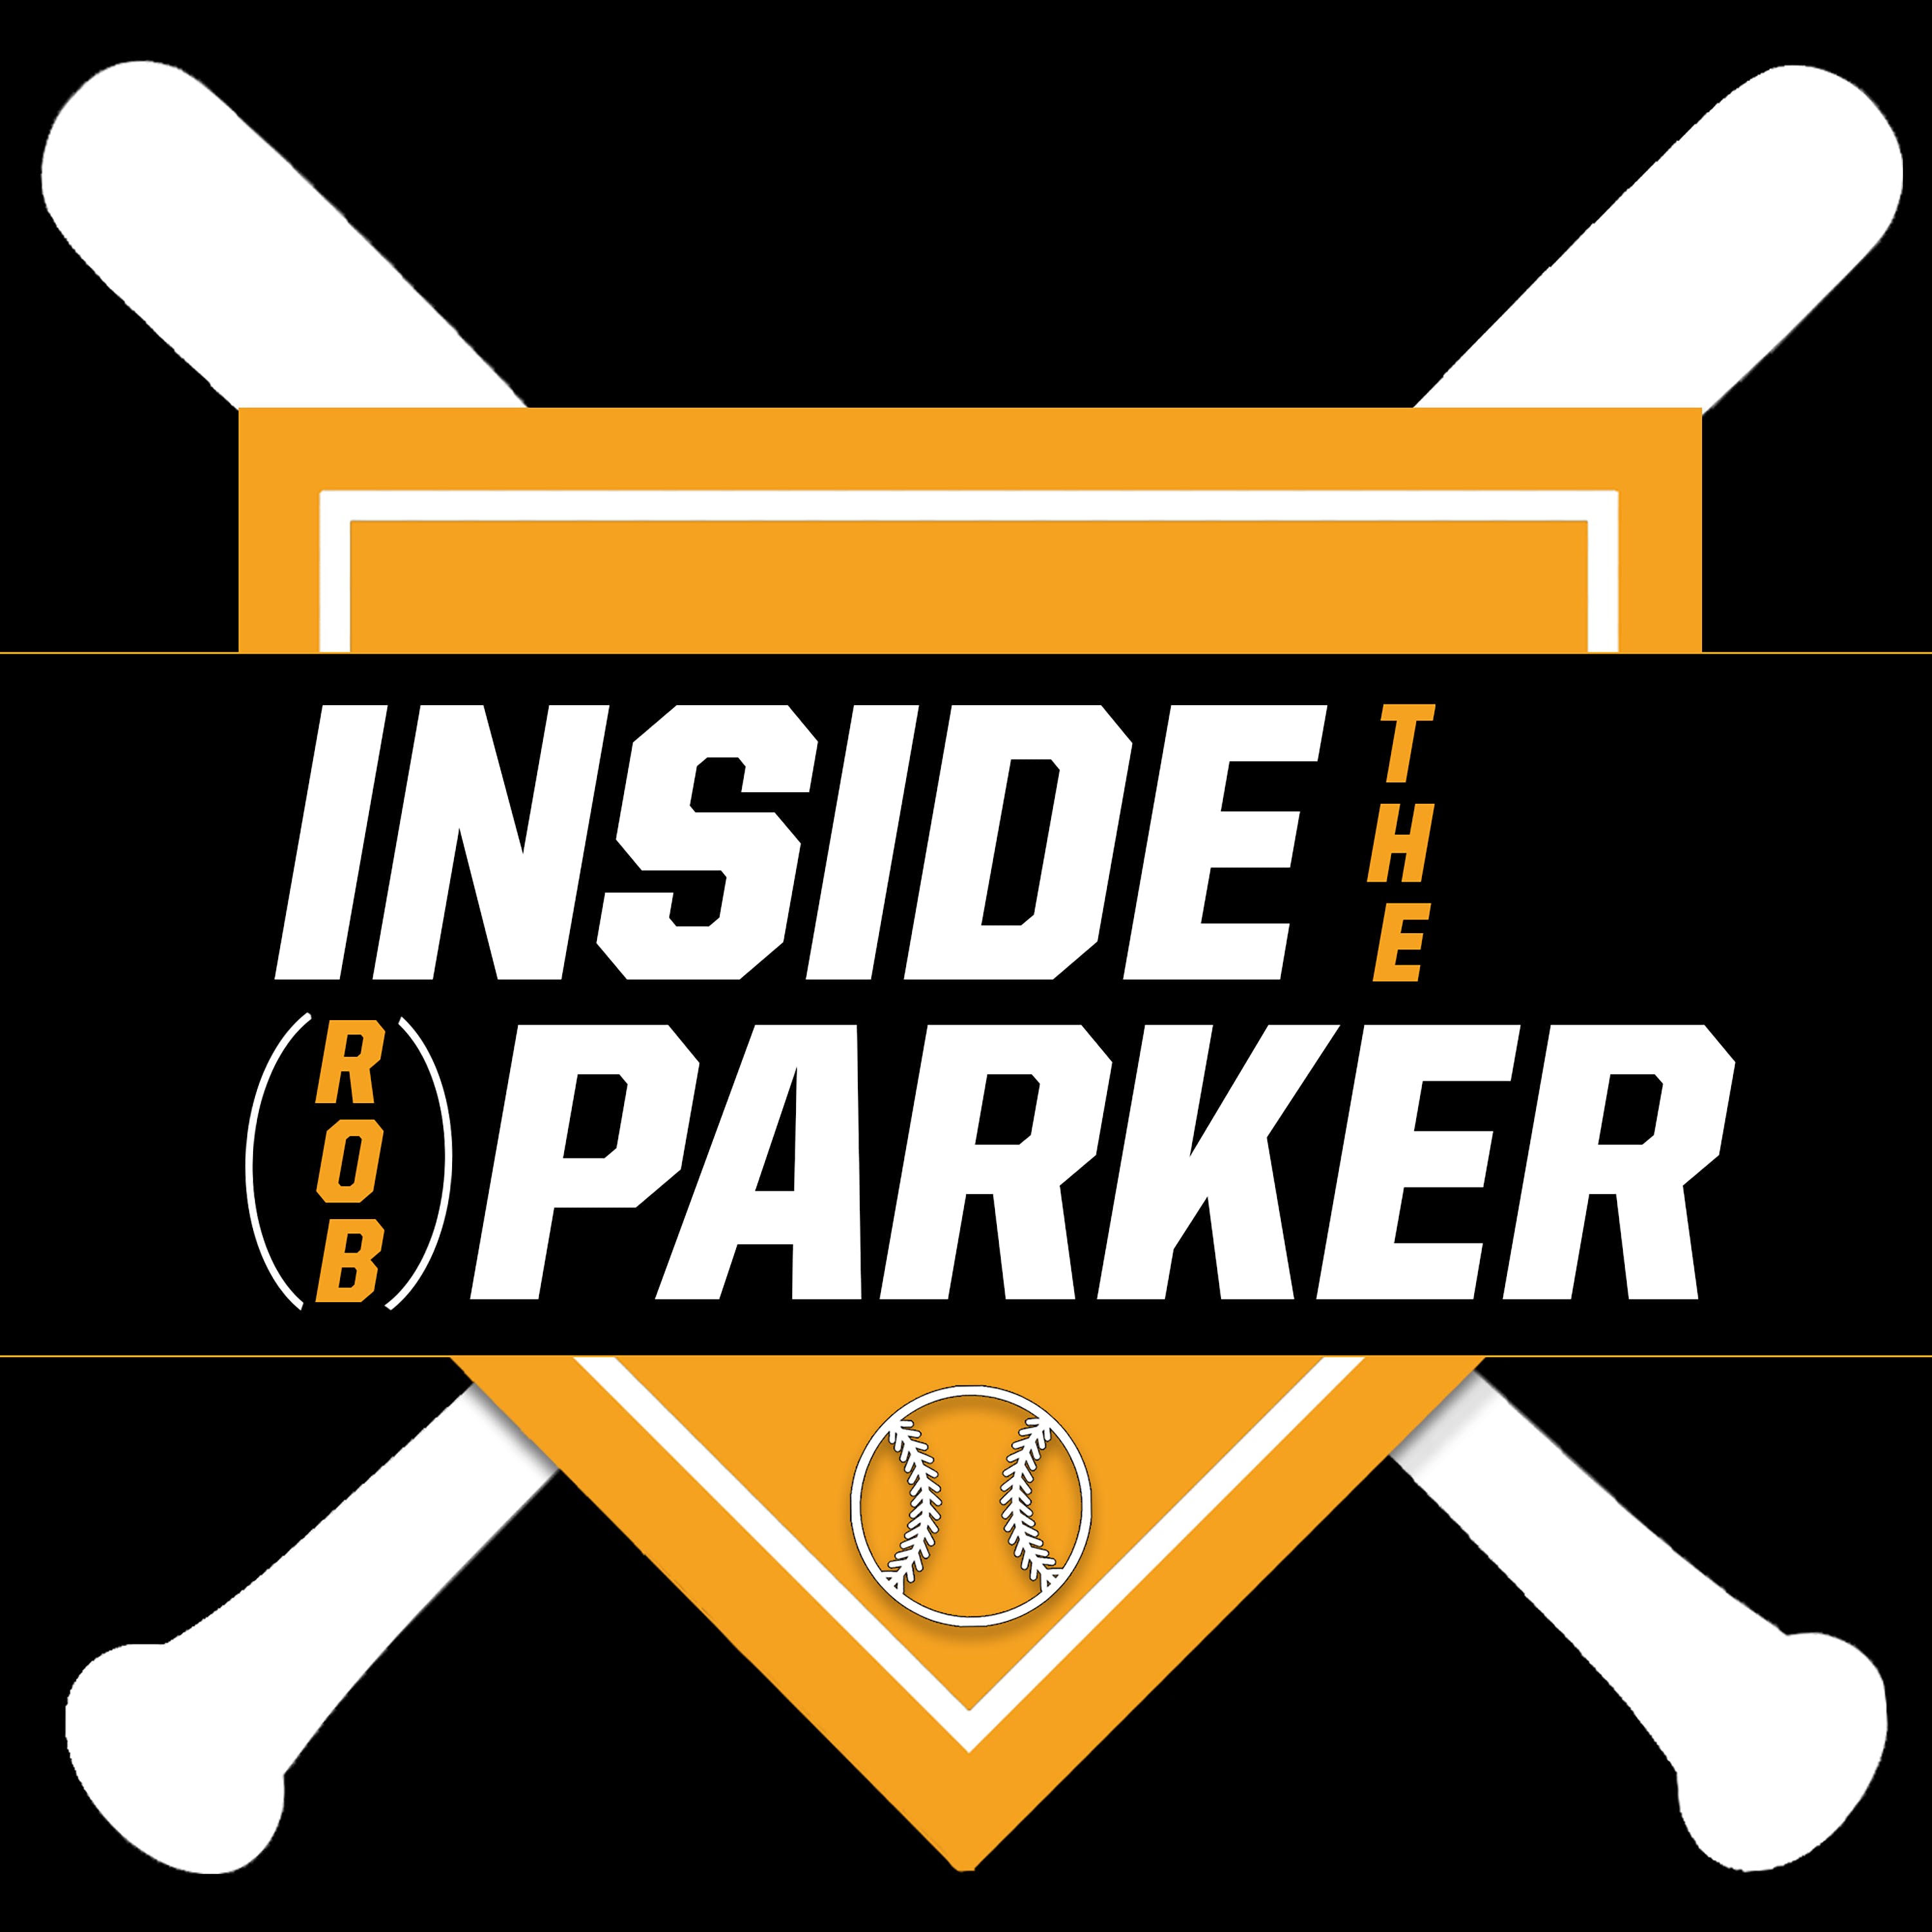 Inside the Parker: Soto to the Yankees? Ohtani Free Agency Rumors + Hall of Fame manager Jim Leyland & MLB umpire Malachi Moore